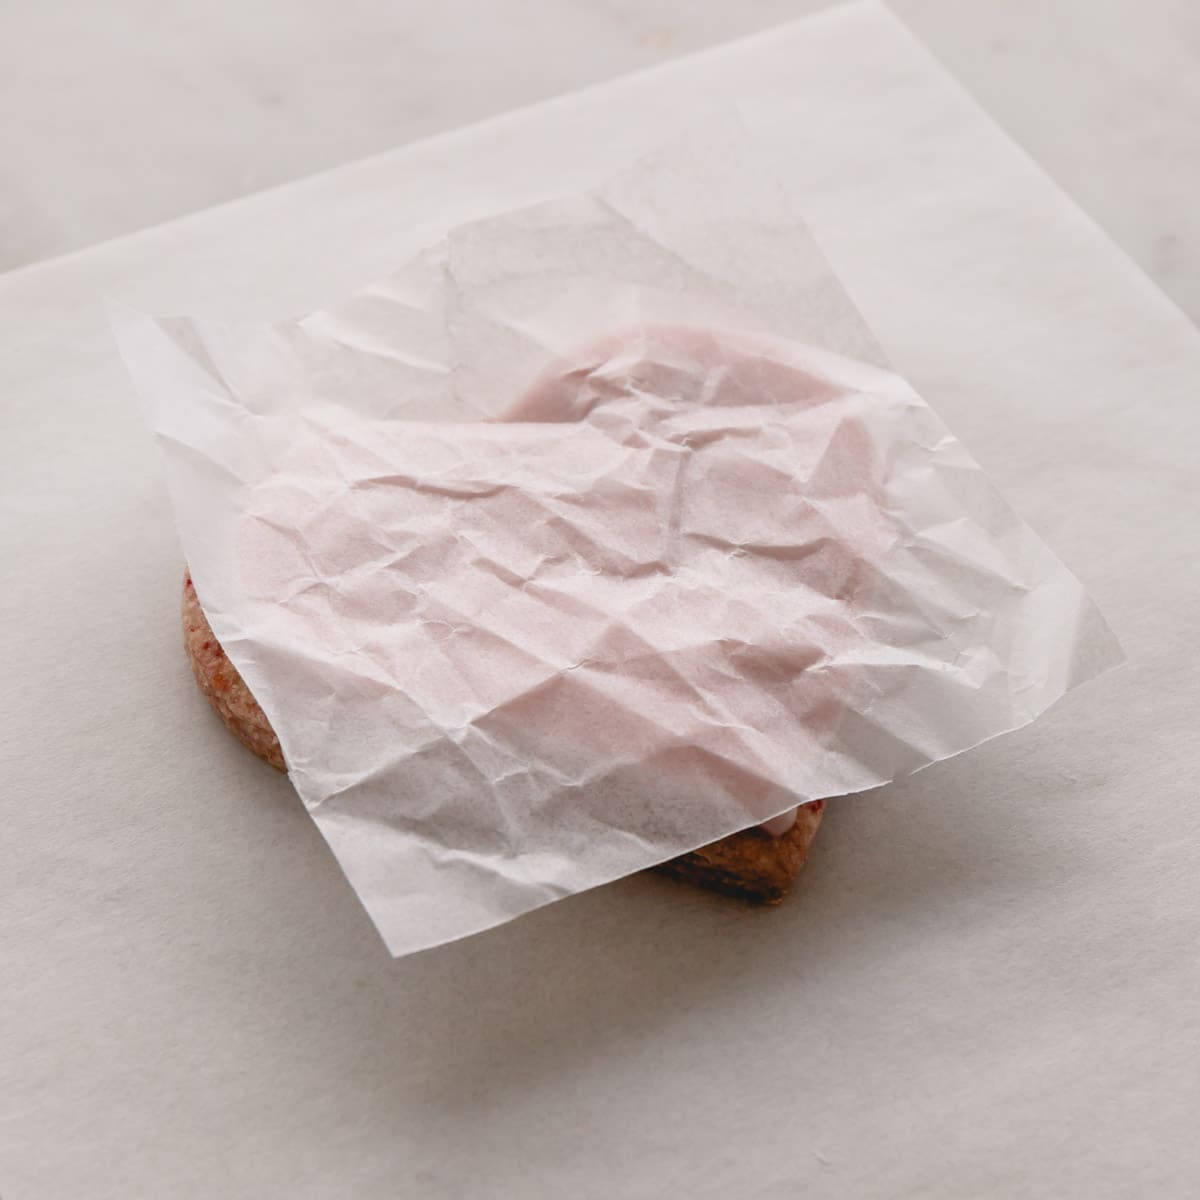 Wax paper being pressed down on top of an iced sugar cookie to create texture.